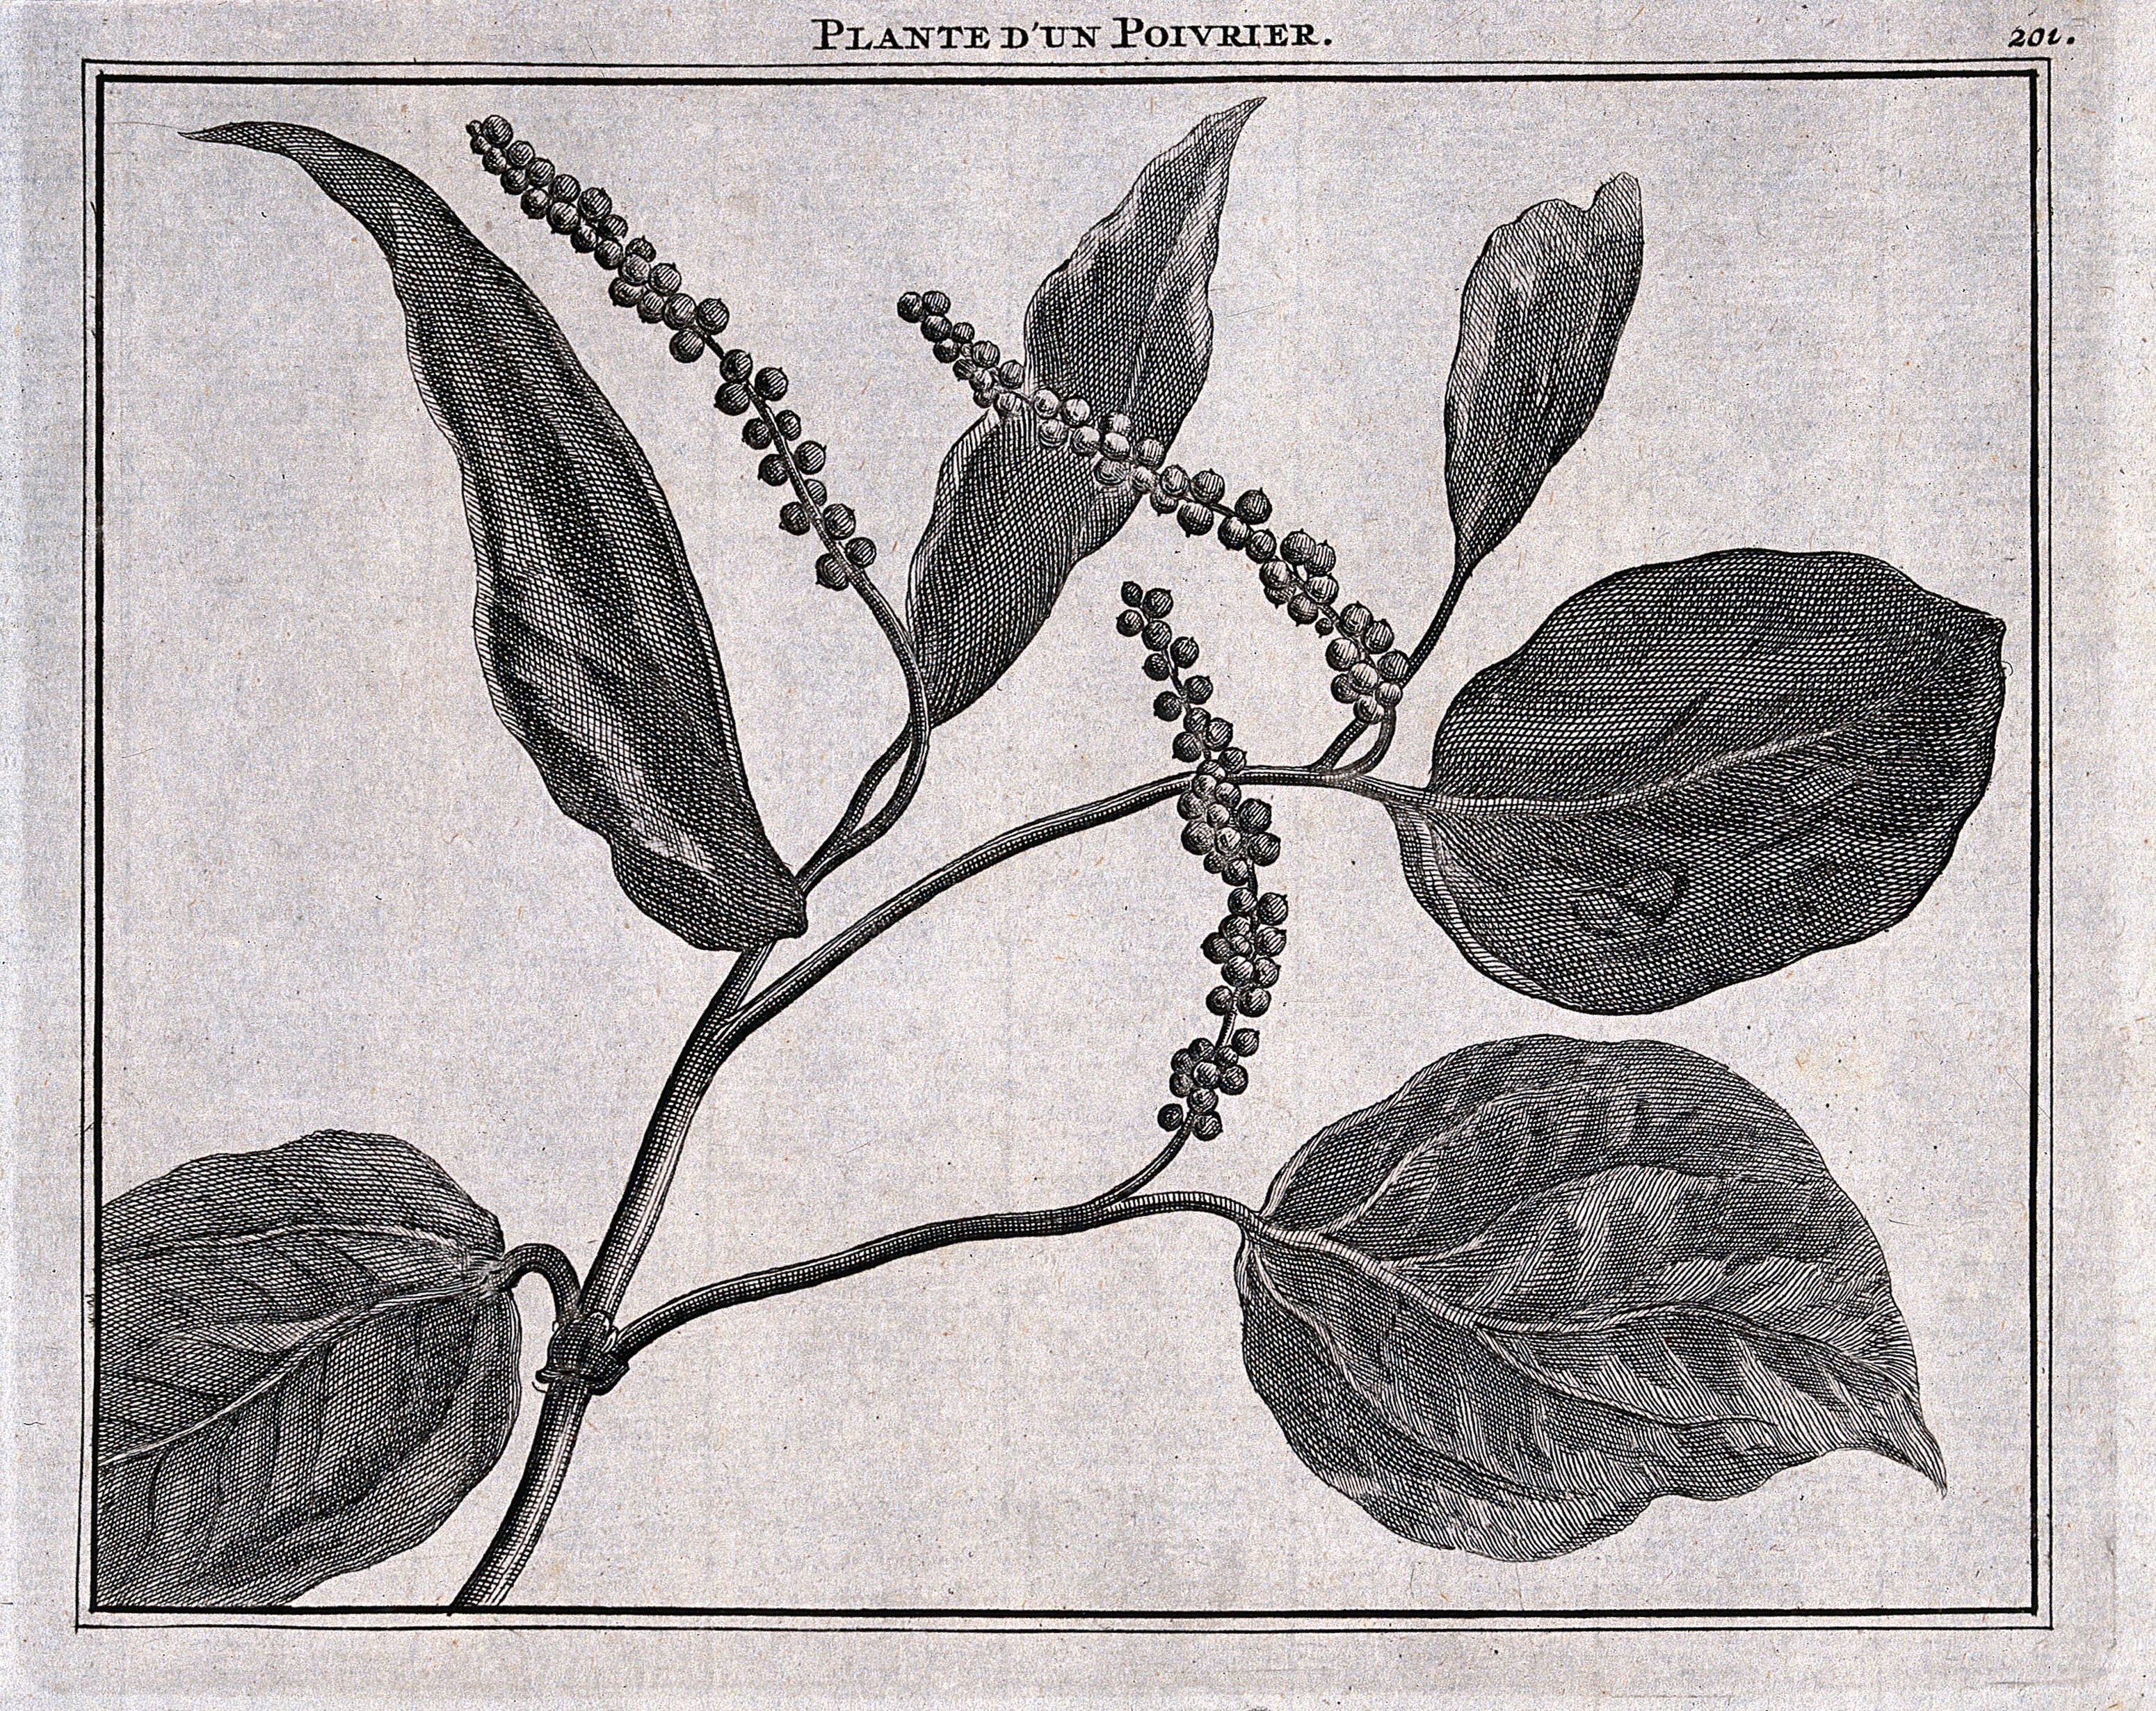 Pepper plant (Piper nigrum L.): fruiting stem. Line after C. de Bruin, 1706. | Wellcome Collection